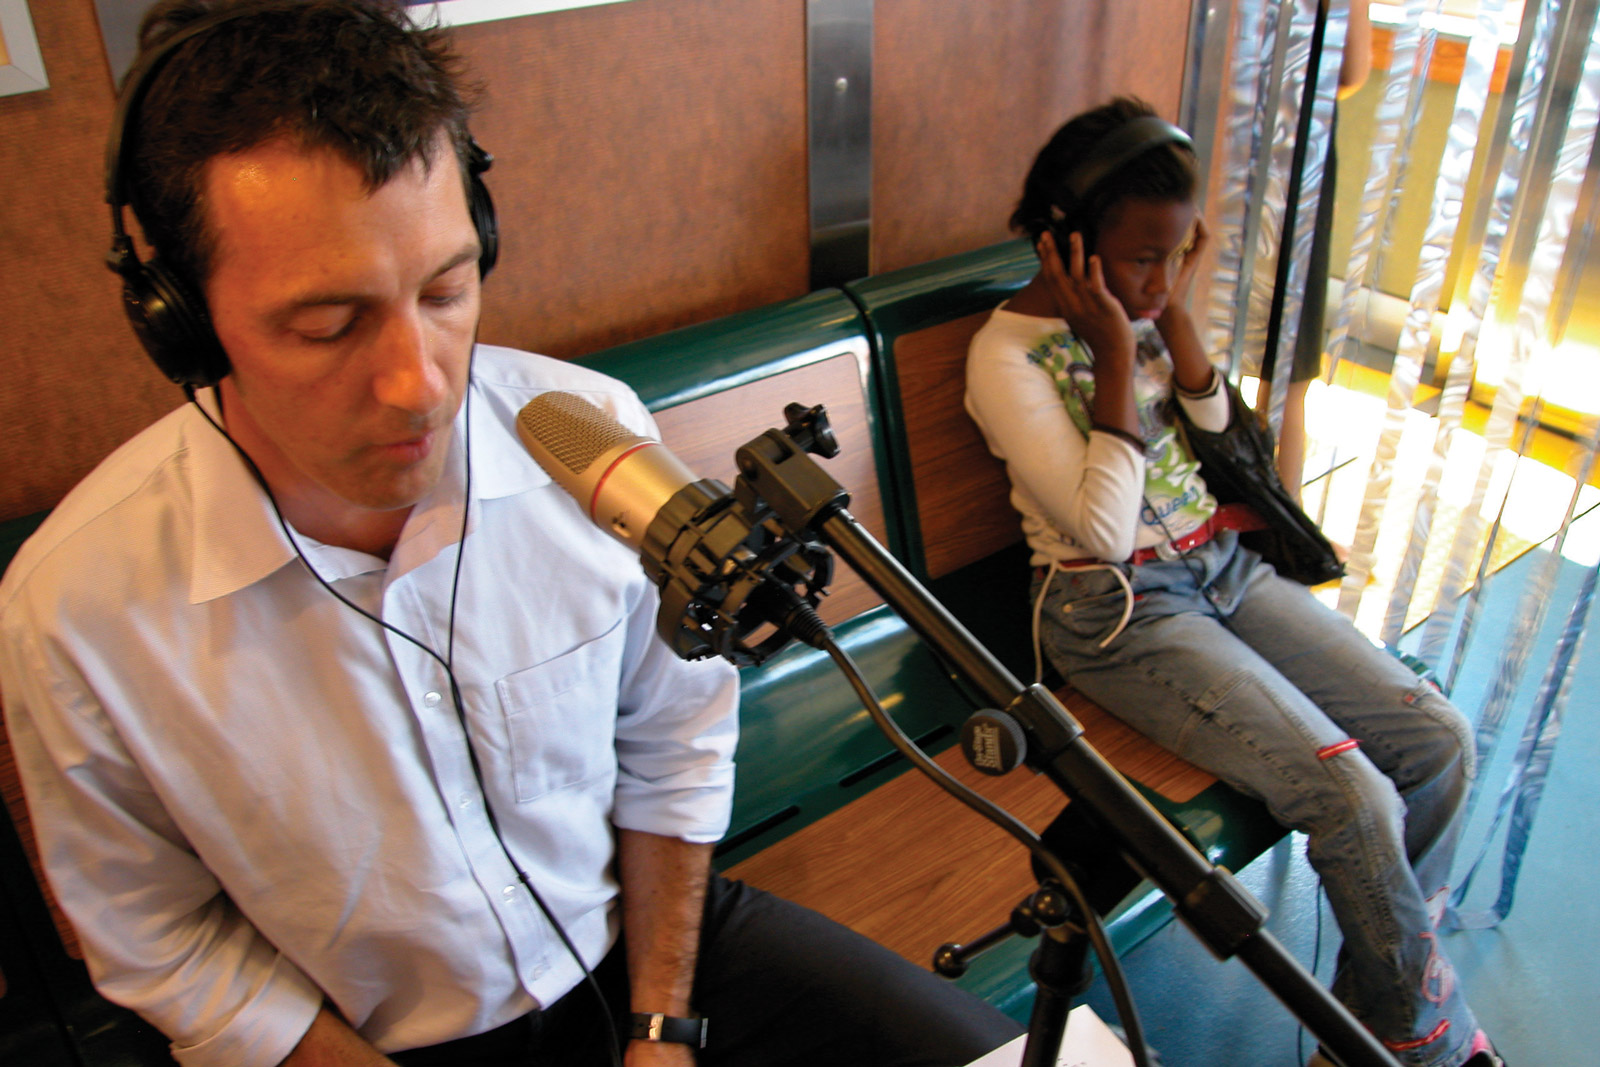 The FM Ferry Experiment studio on the John J. Marchi Staten Island Ferry. Image features (left to right) on-air guest Alex Matthiessen of Riverkeeper and ferry rider listening in.